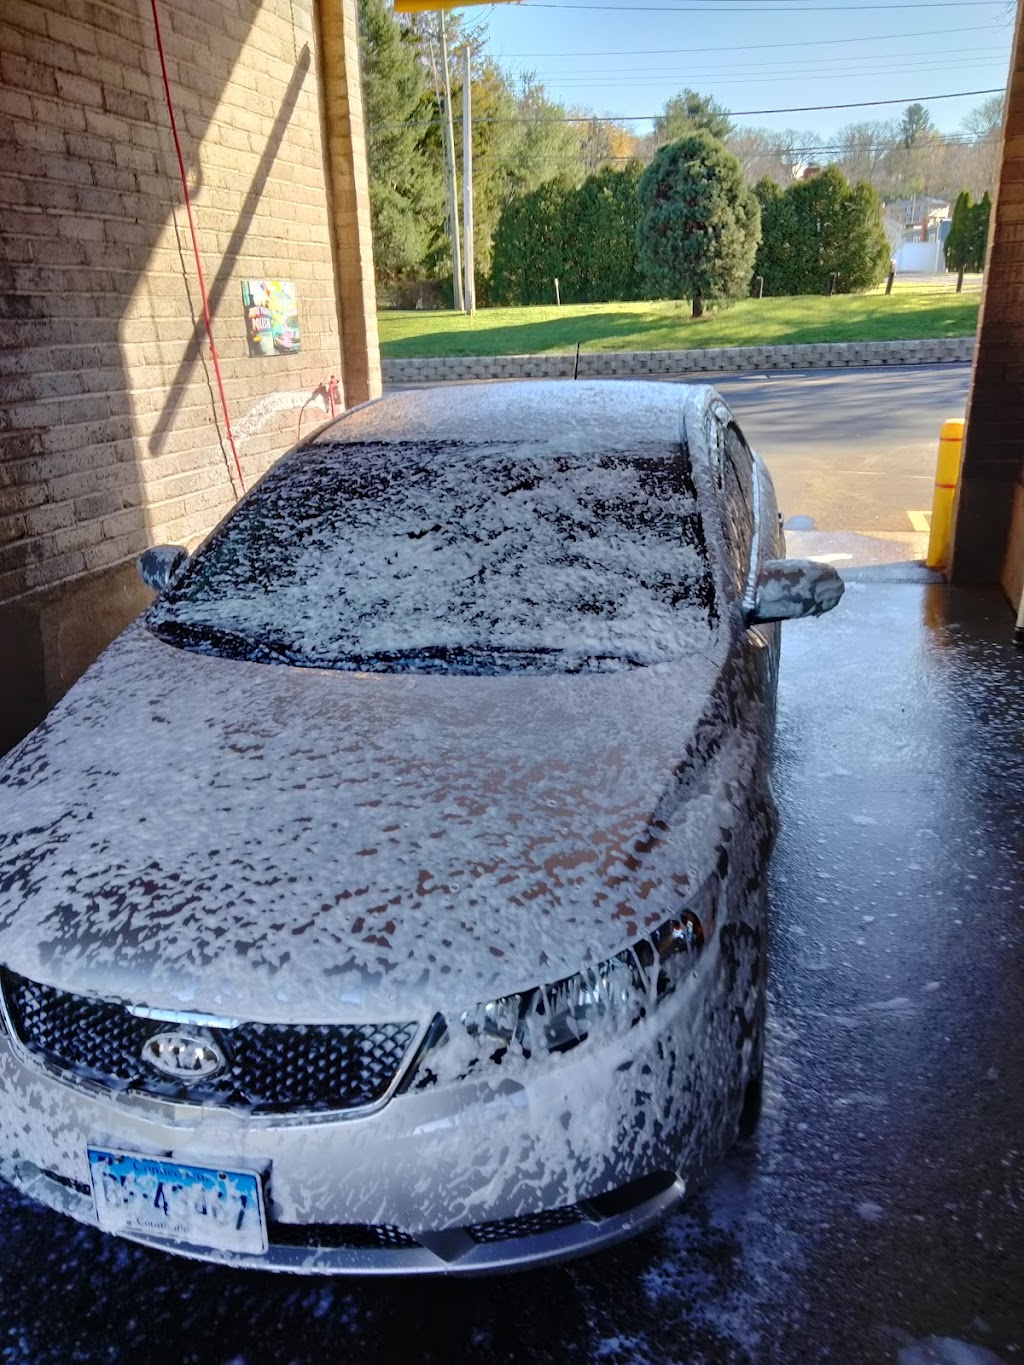 Buggy Car Wash | 51 Middletown Ave, North Haven, CT 06473 | Phone: (203) 495-9945